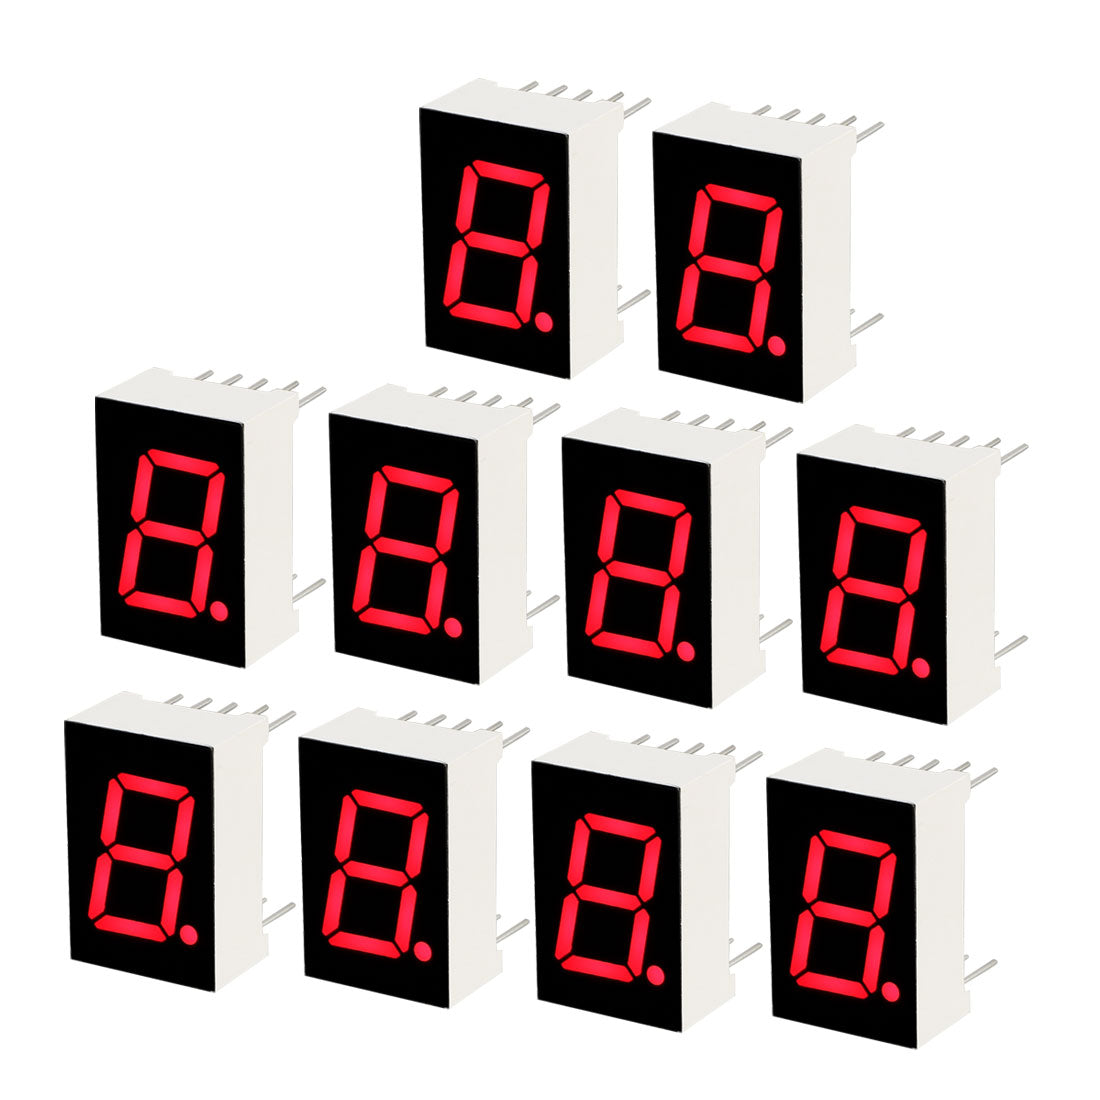 Uxcell Uxcell Common Cathode 10 Pin 1 Bit 7 Segment 0.75 x 0.5 x 0.31 Inch 0.5" Red LED Display Digital Tube 4pcs